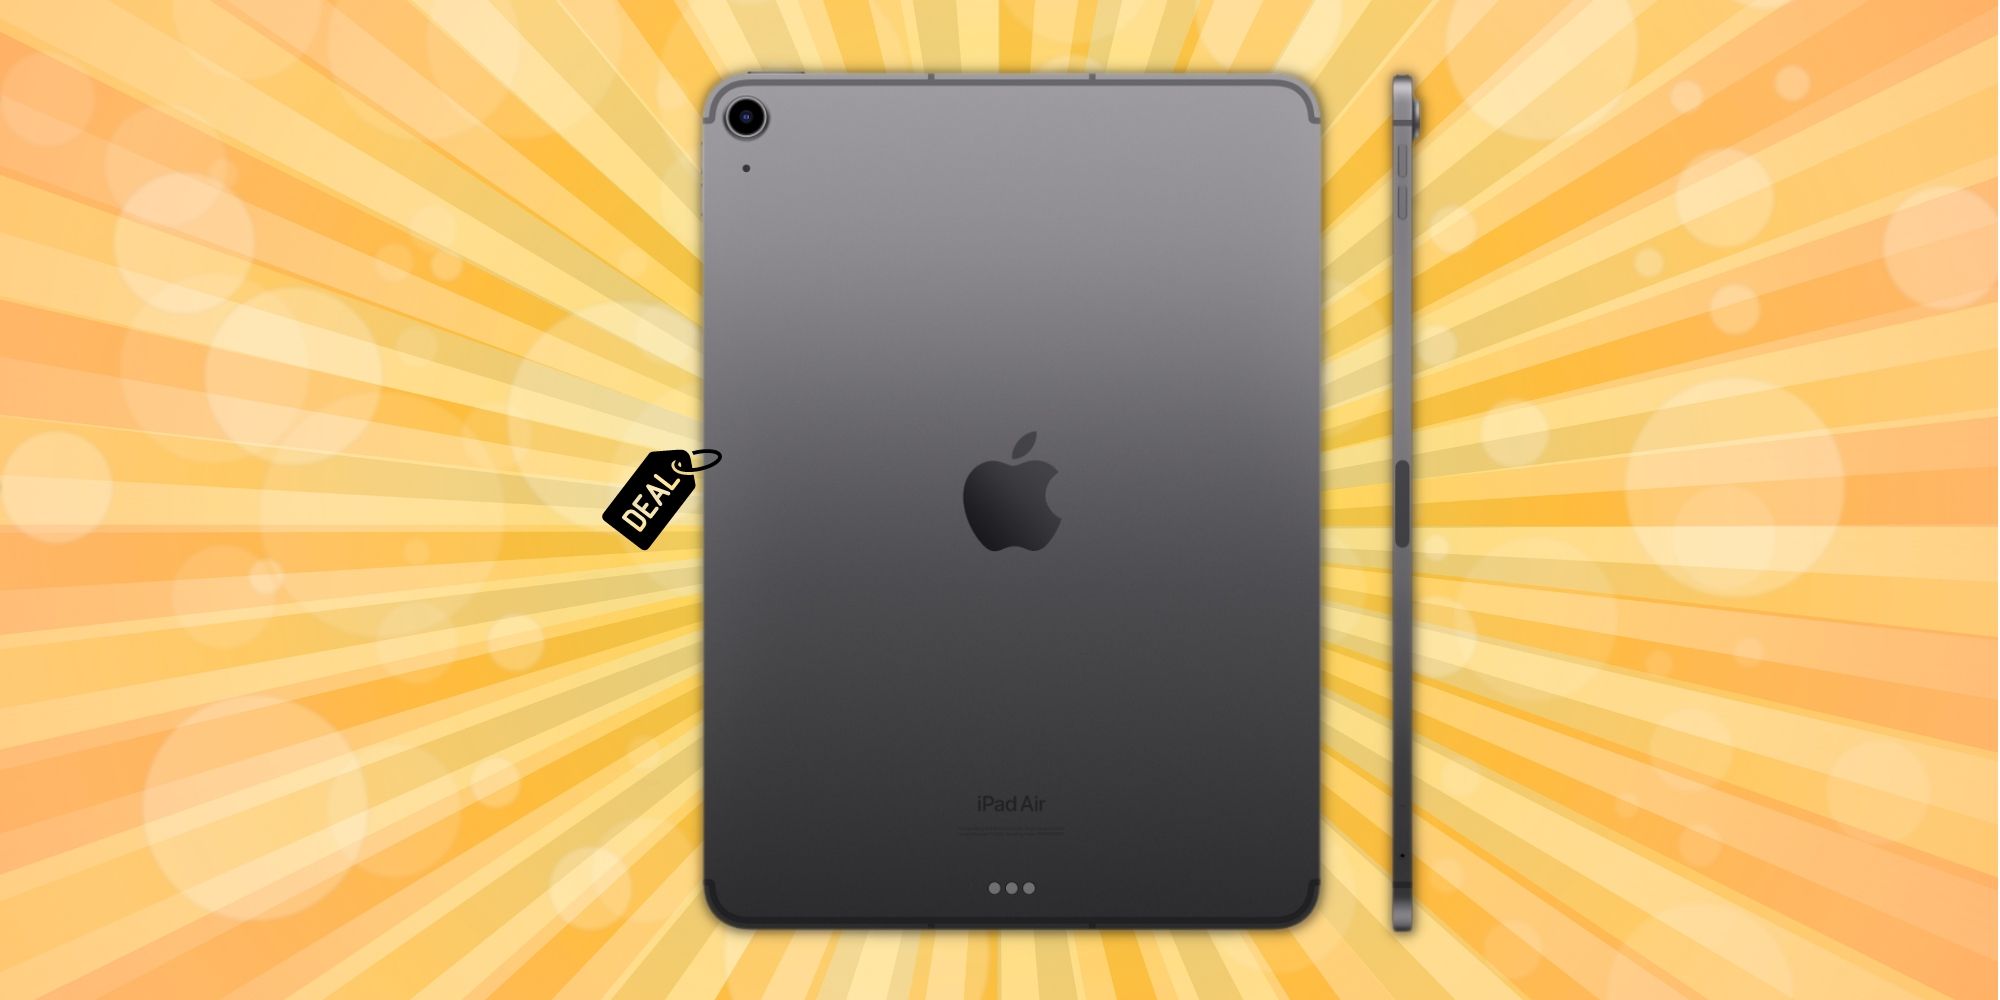 Deal on a Apple 2022 iPad Air with M1 chip